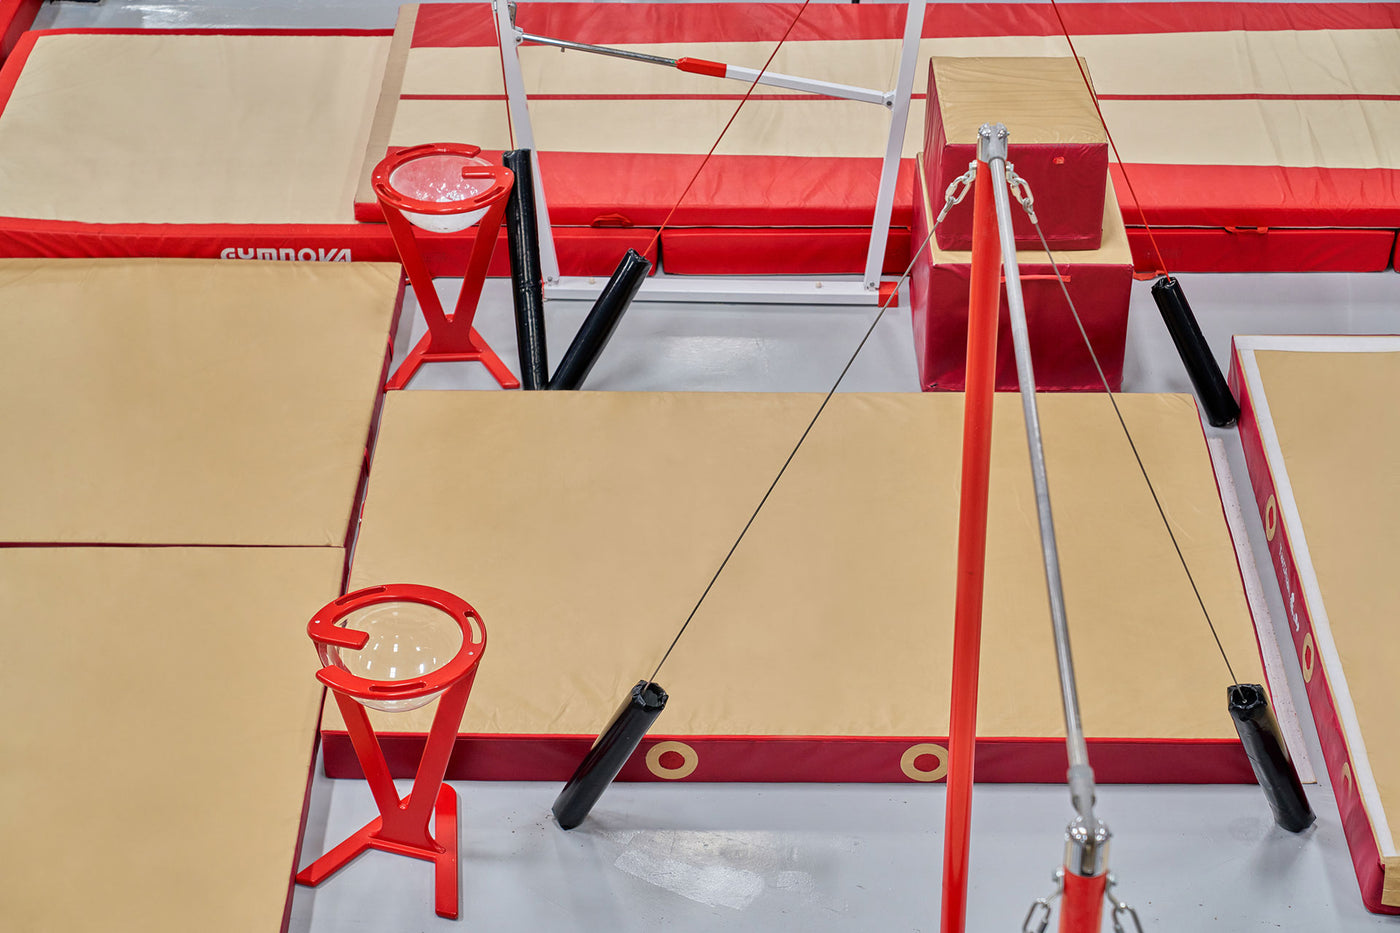  Artistic Gymnastics Gallery Image 4 - Level Up Gyms